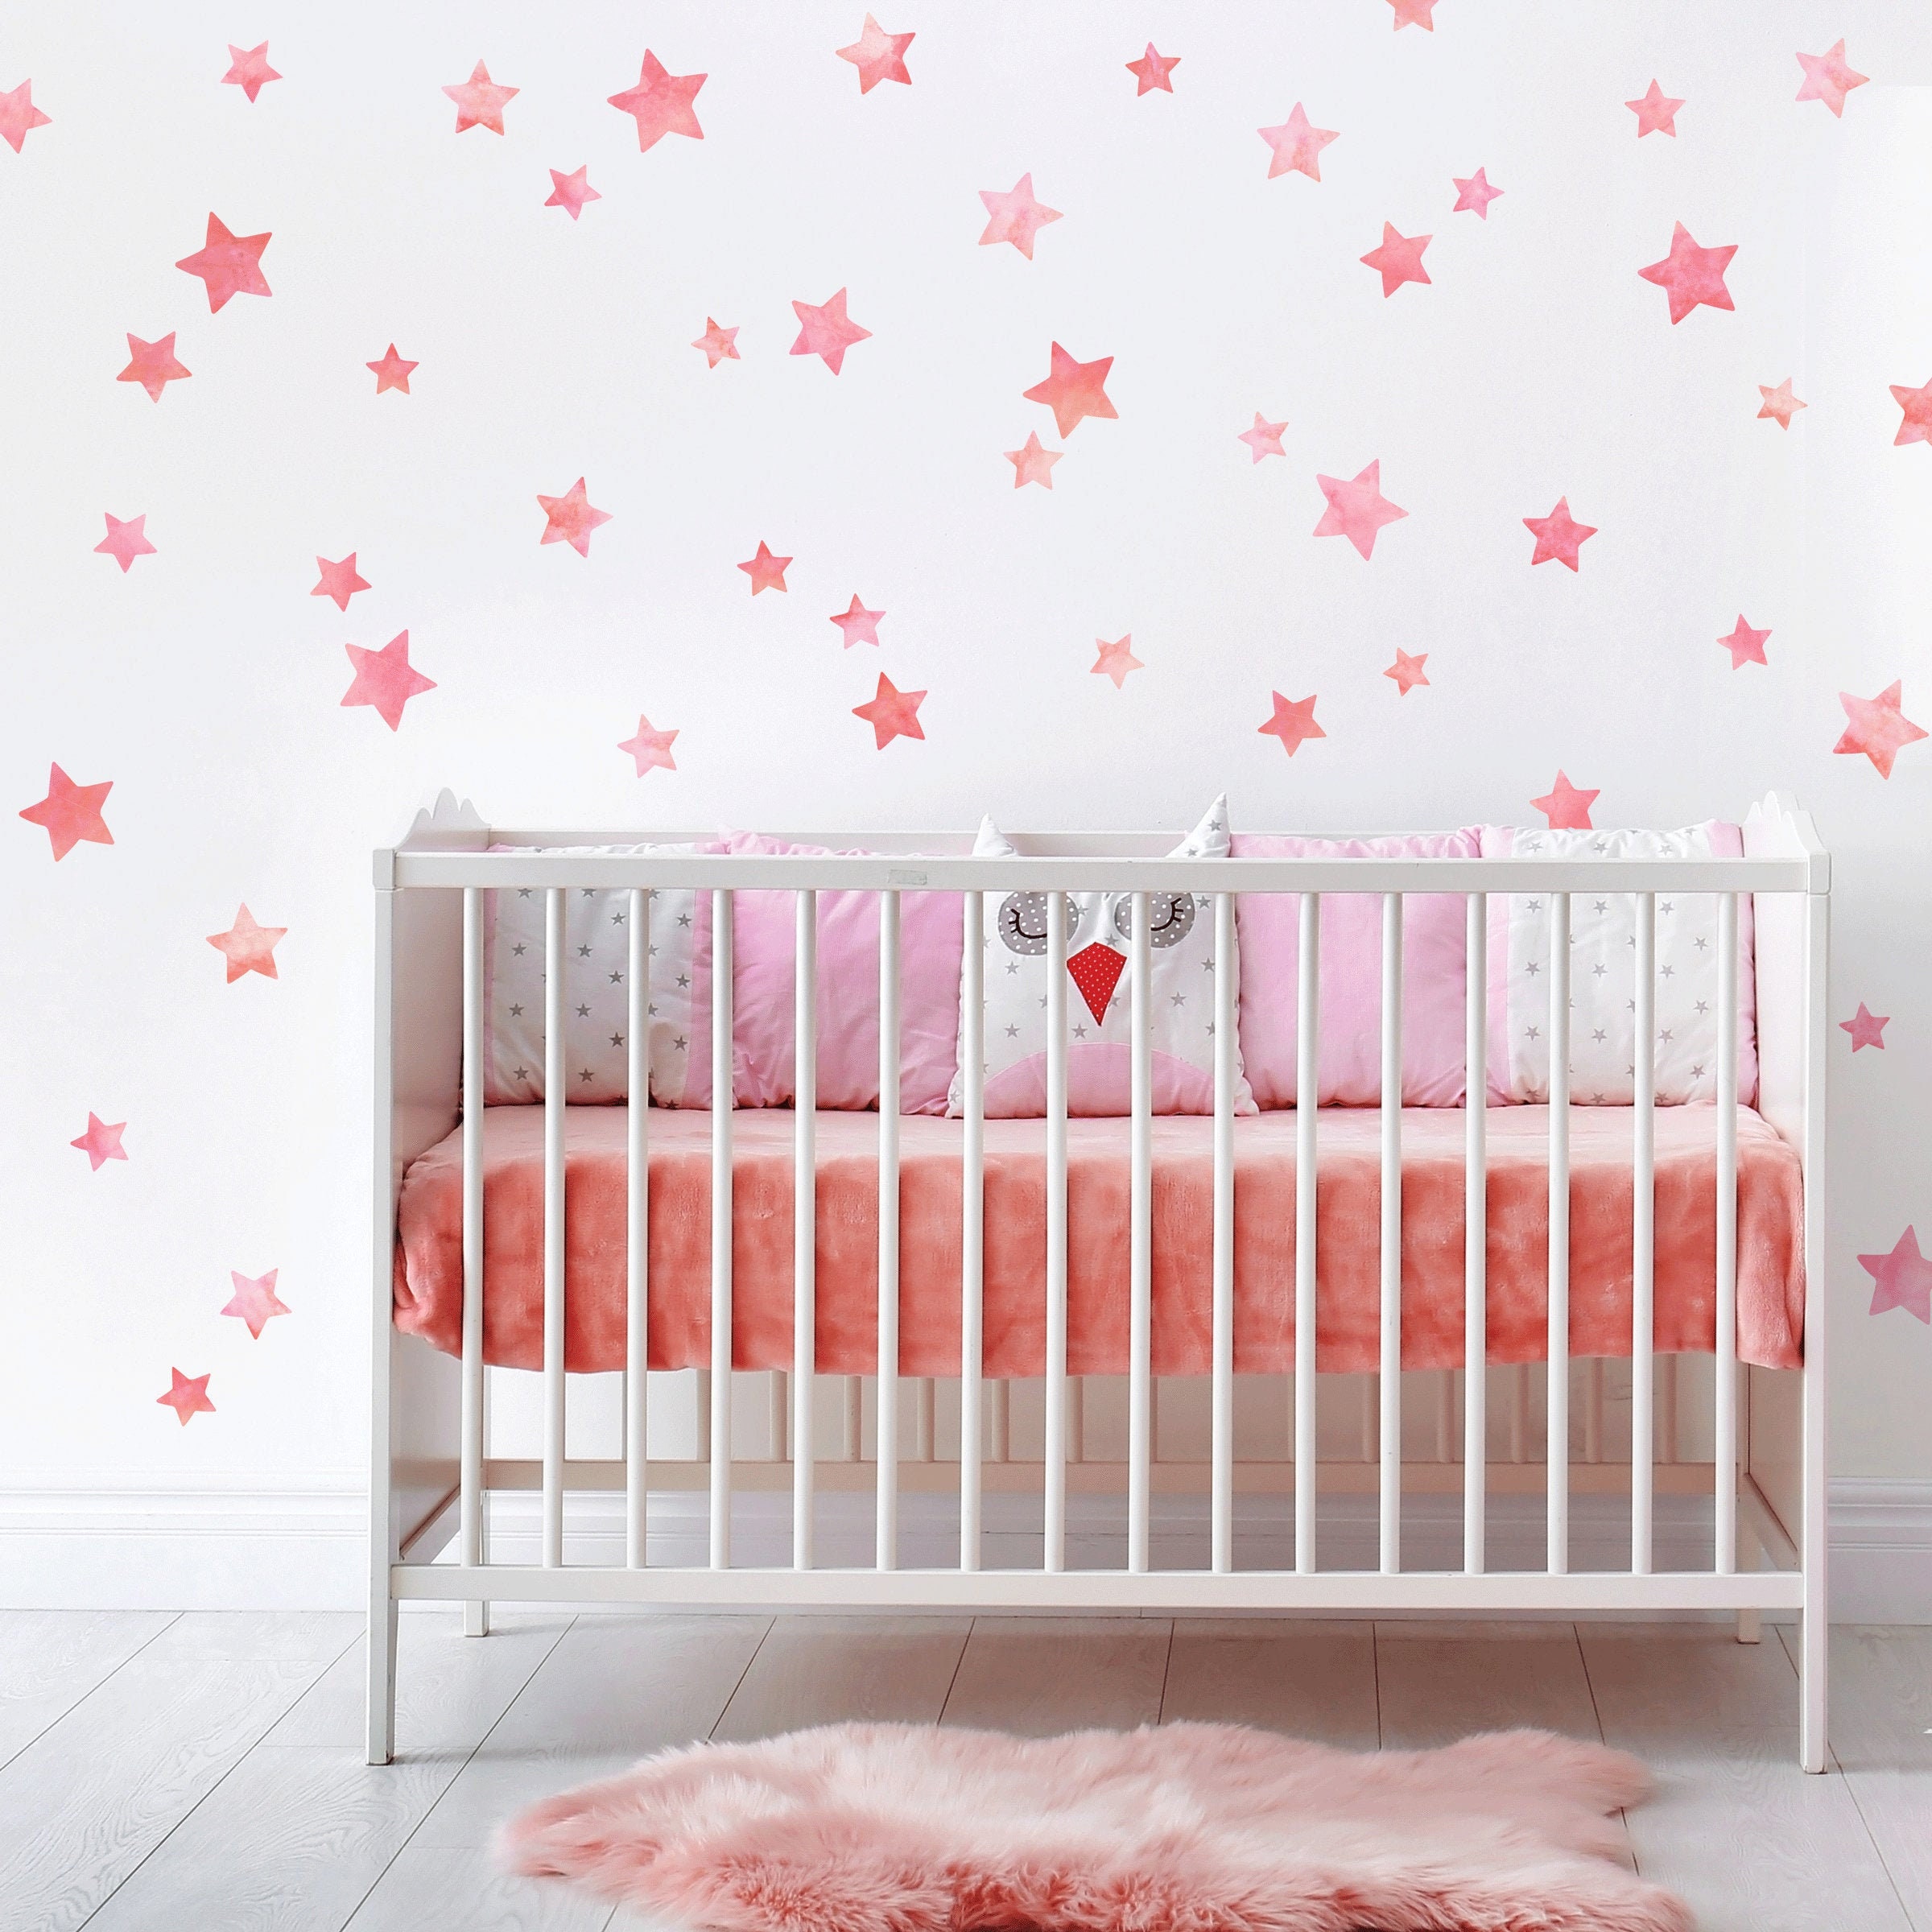 52 Hot Pink Vinyl Star Shaped Bedroom Wall Decals Stickers Stars